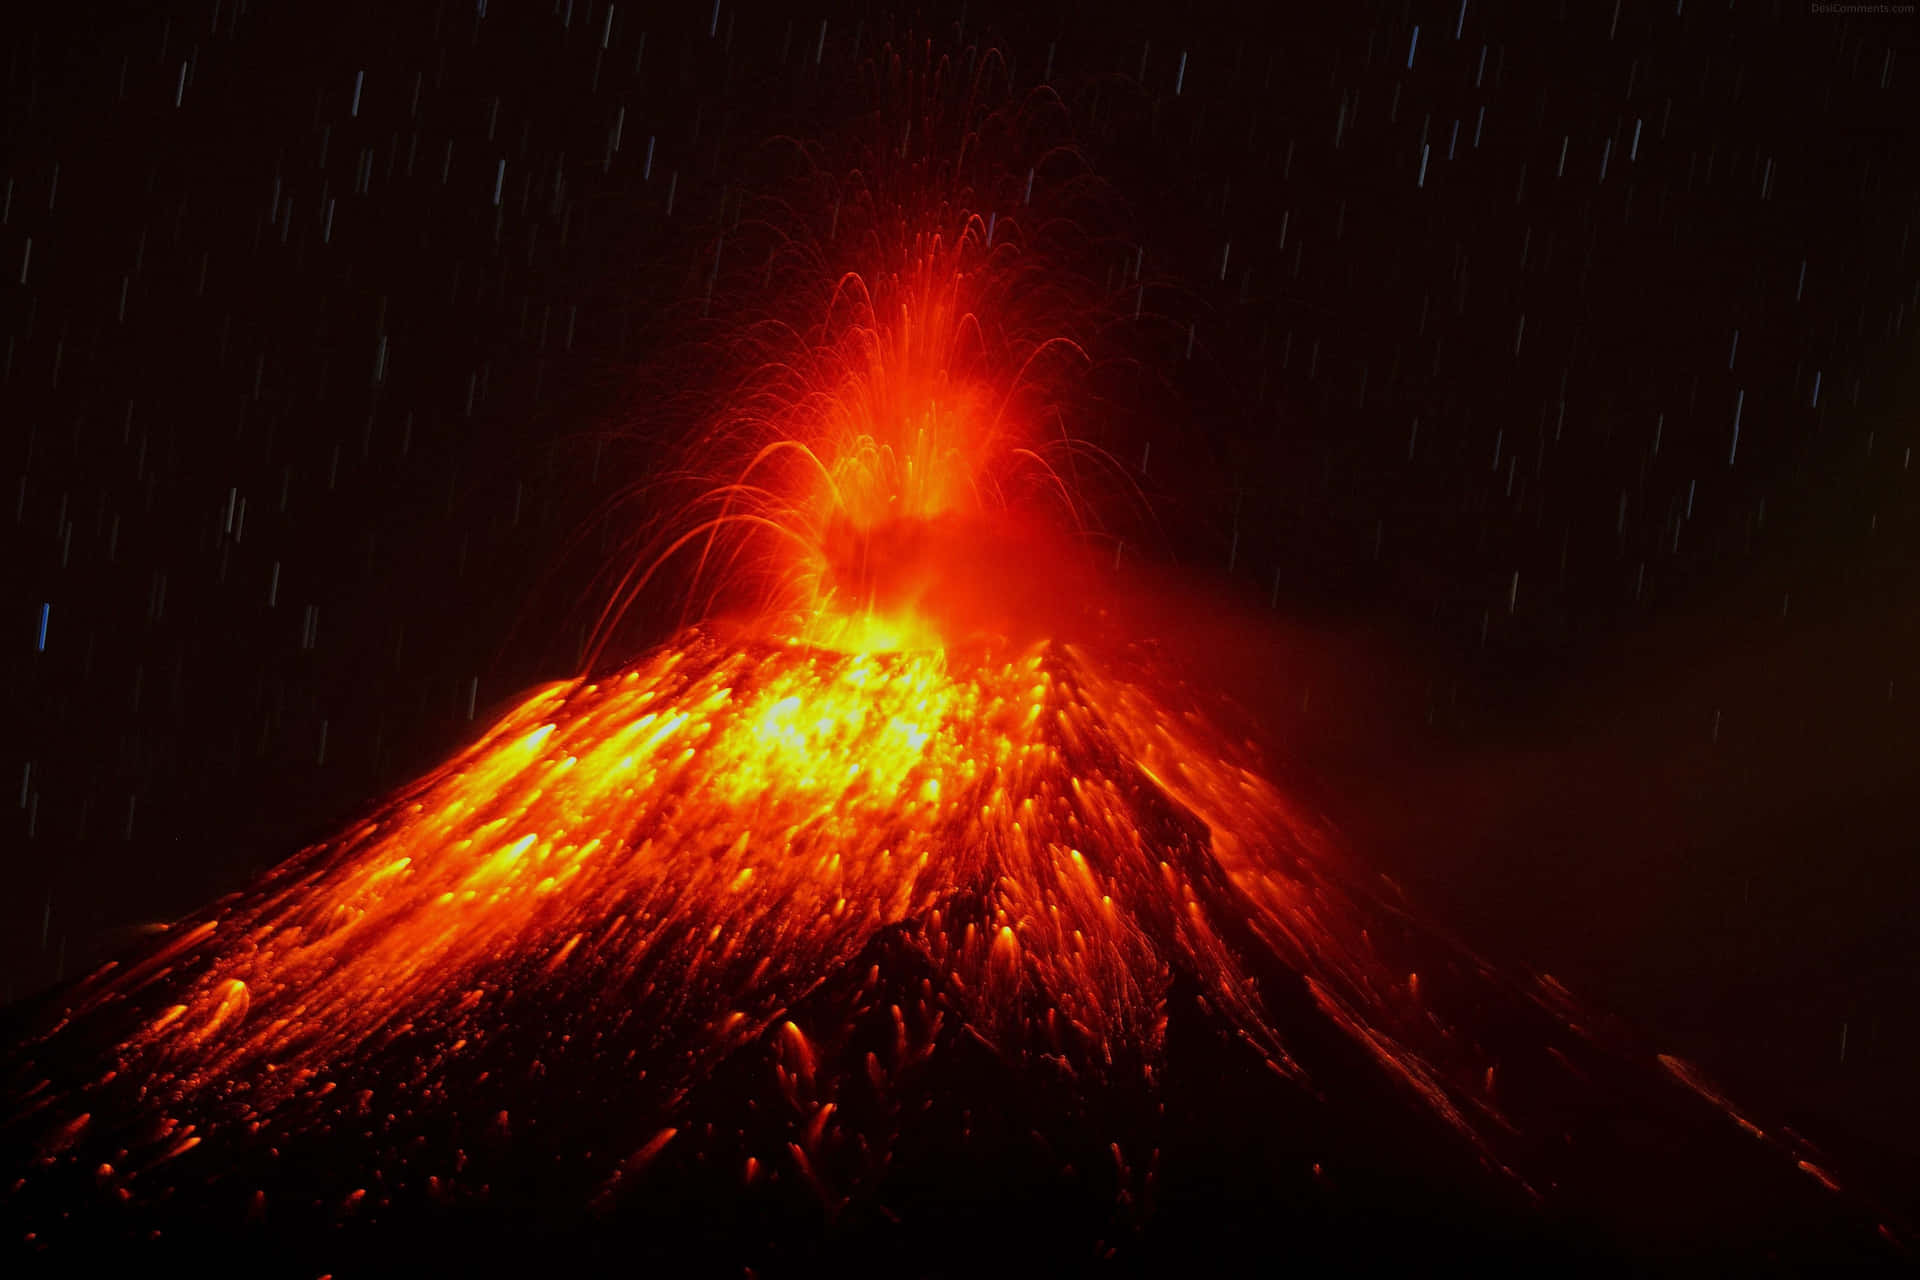 The awesome power of an erupting volcano